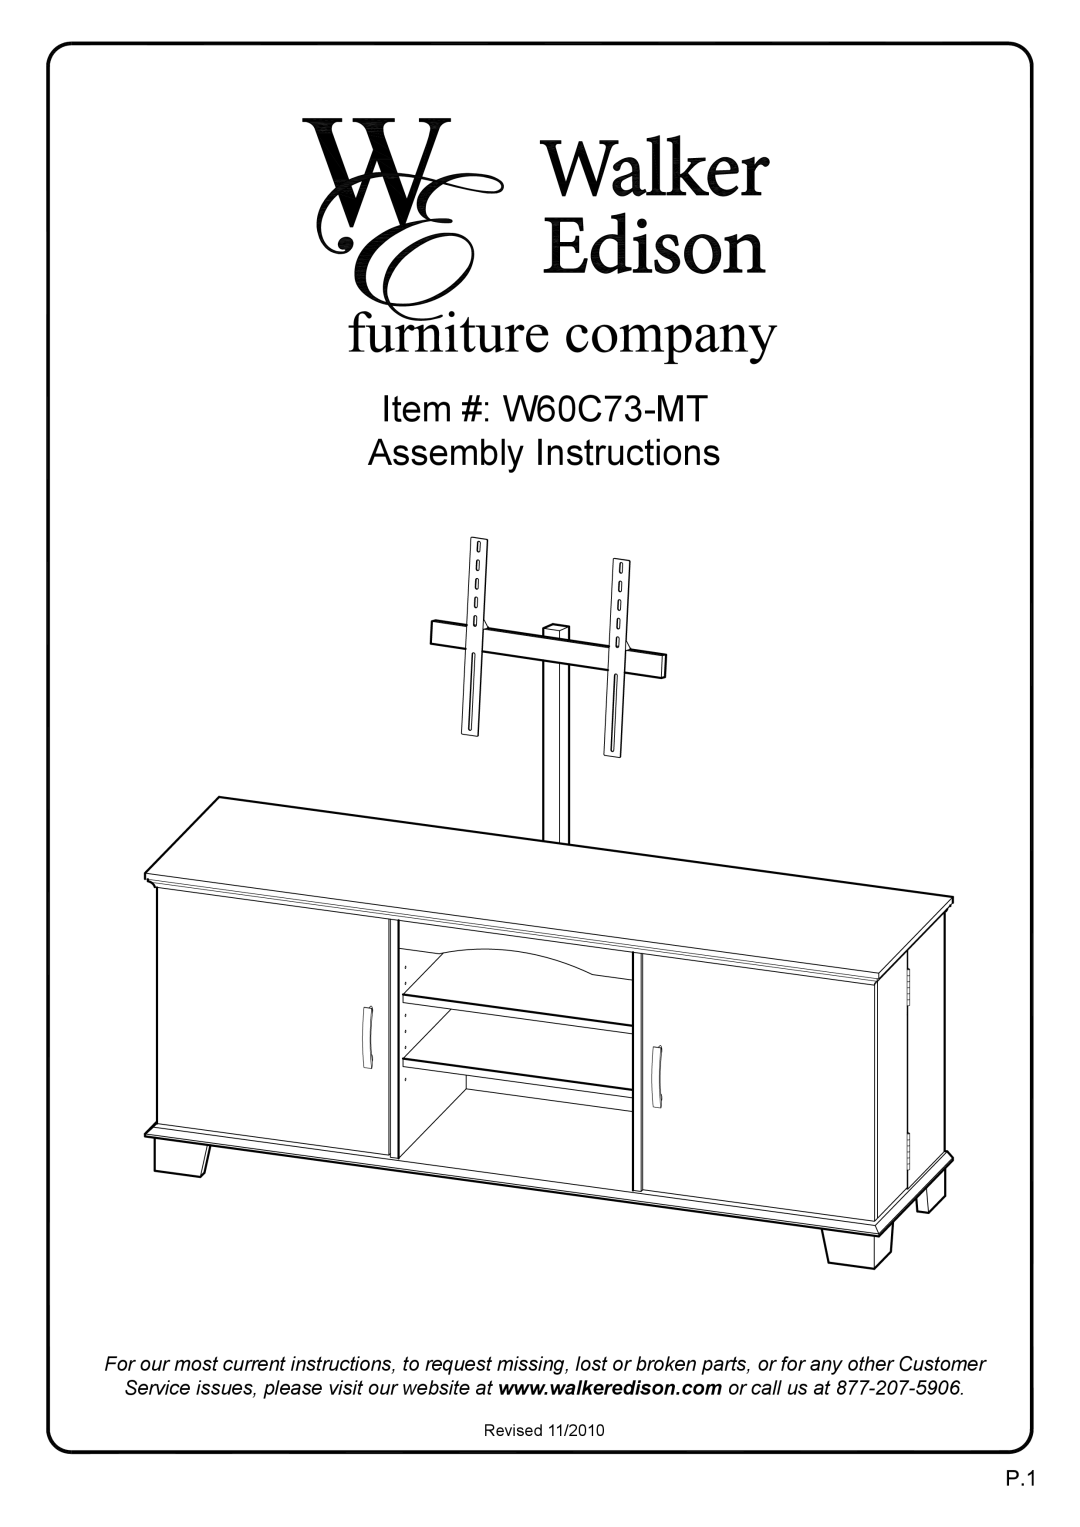 Walker W60C73MB-MT, W60C73BL-MT manual Item # W60C73-MT Assembly Instructions, Revised 11/2010 